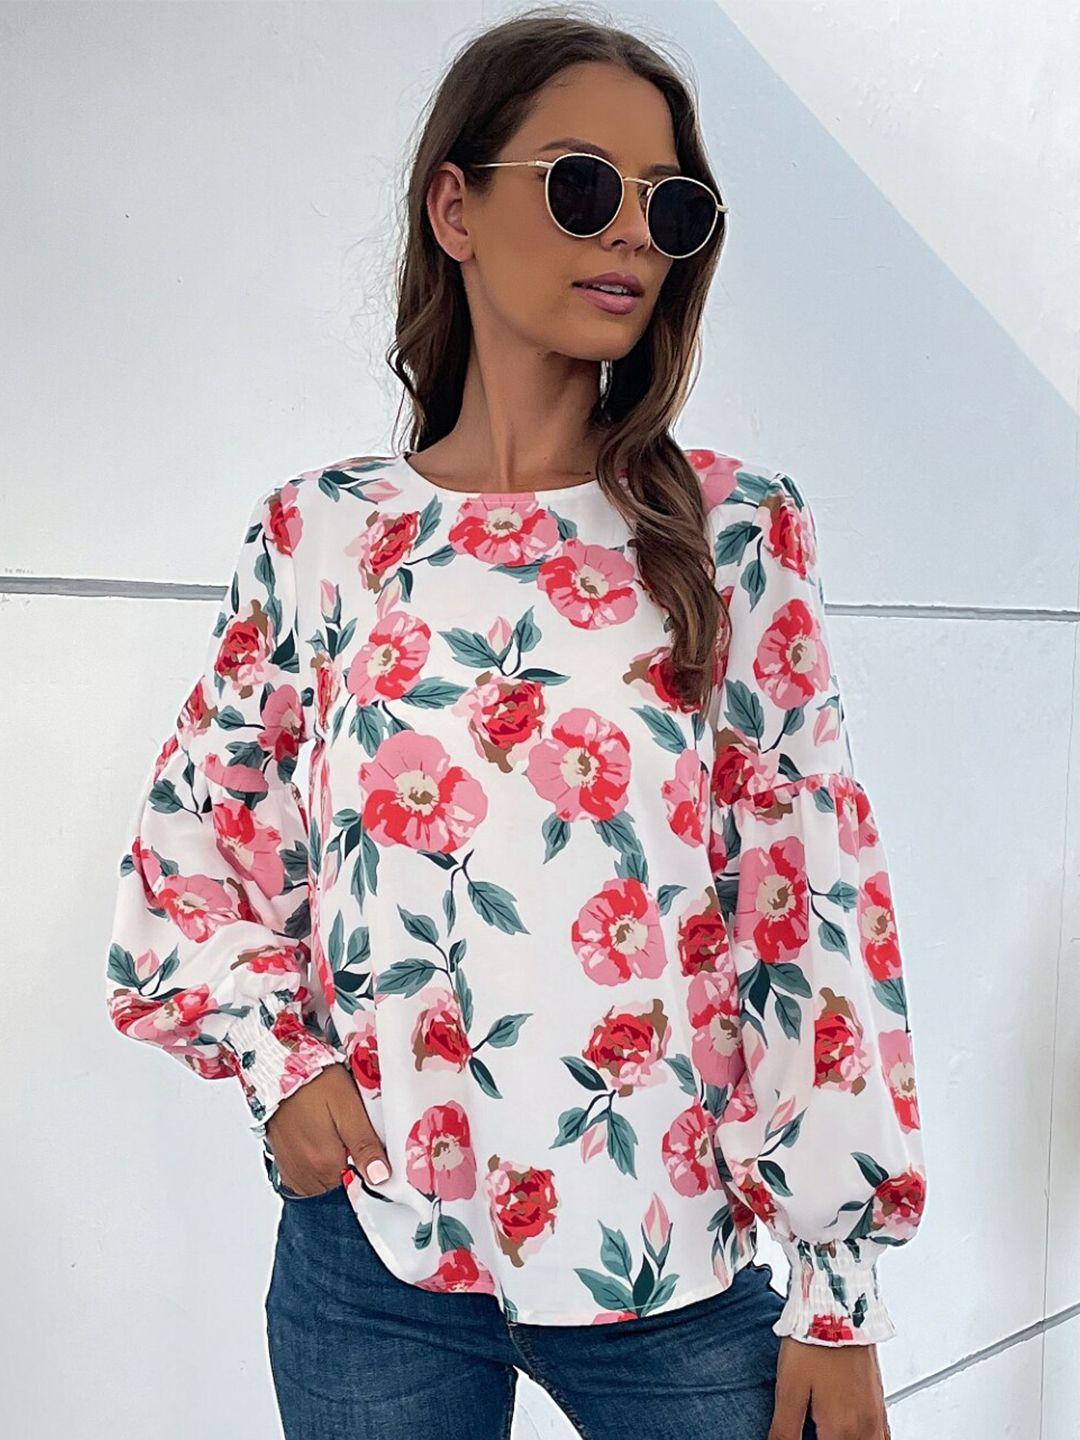 stylecast white floral printed cuffed sleeves top